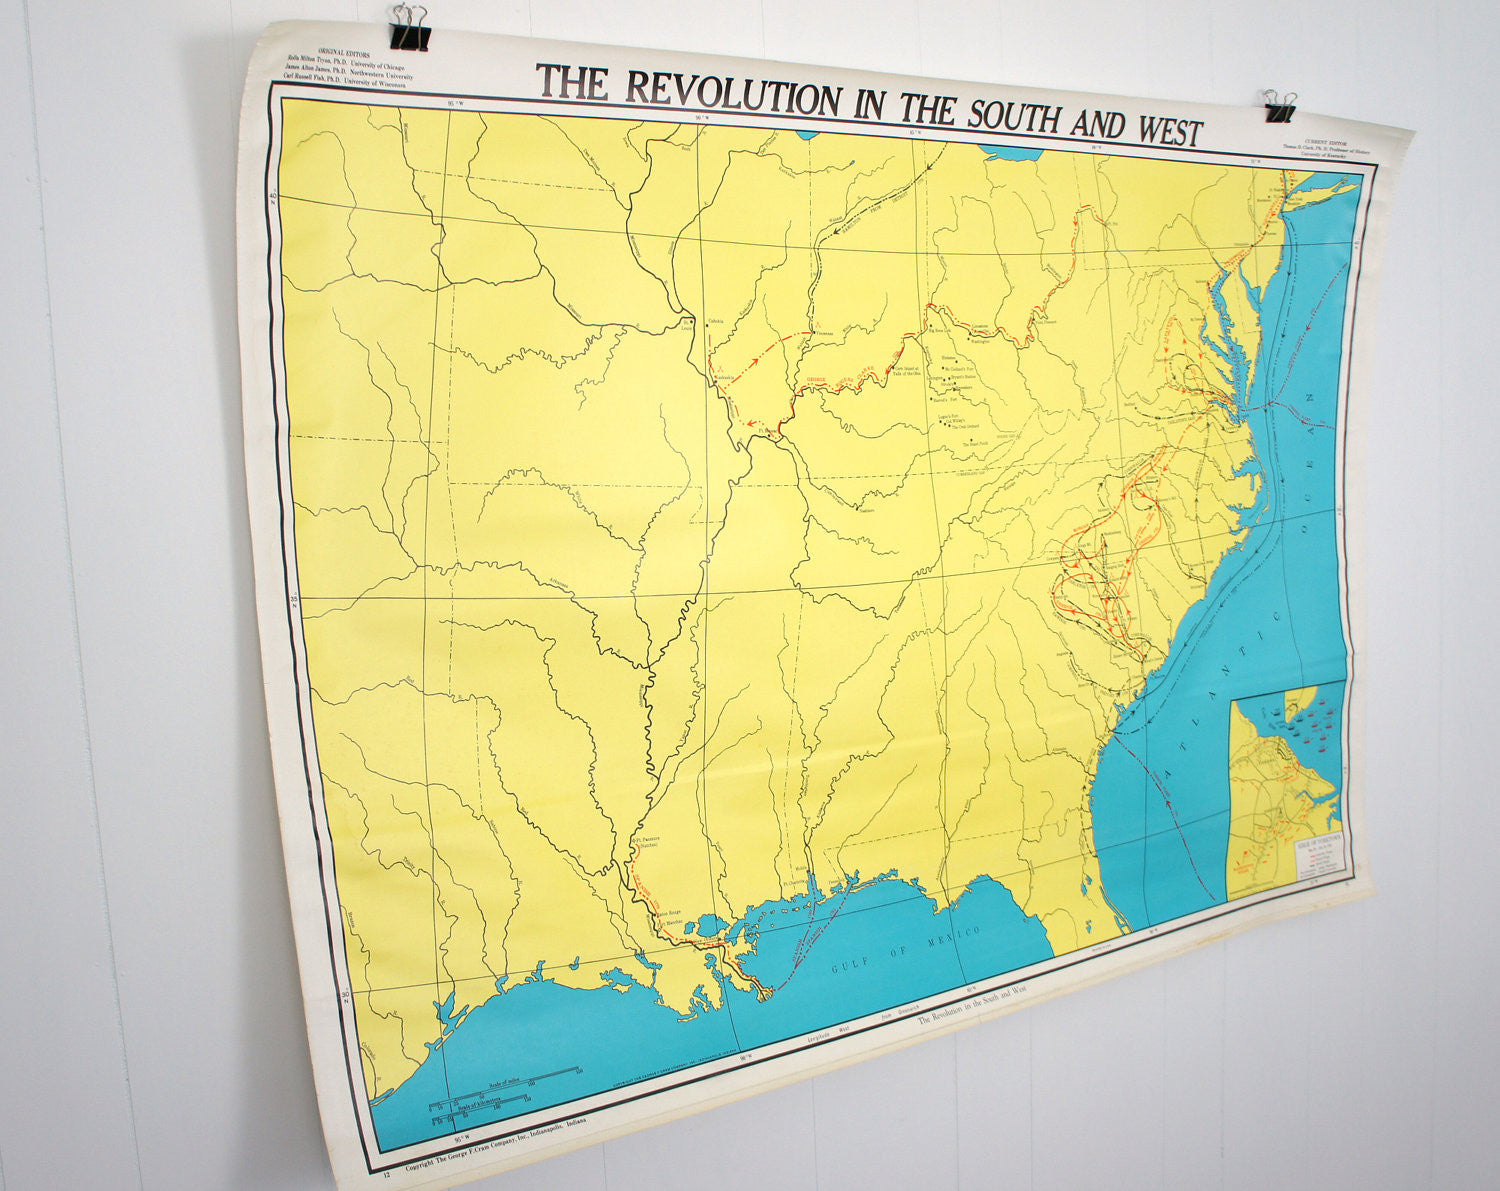 U.S. History Wall Map - Revolution In The South & West